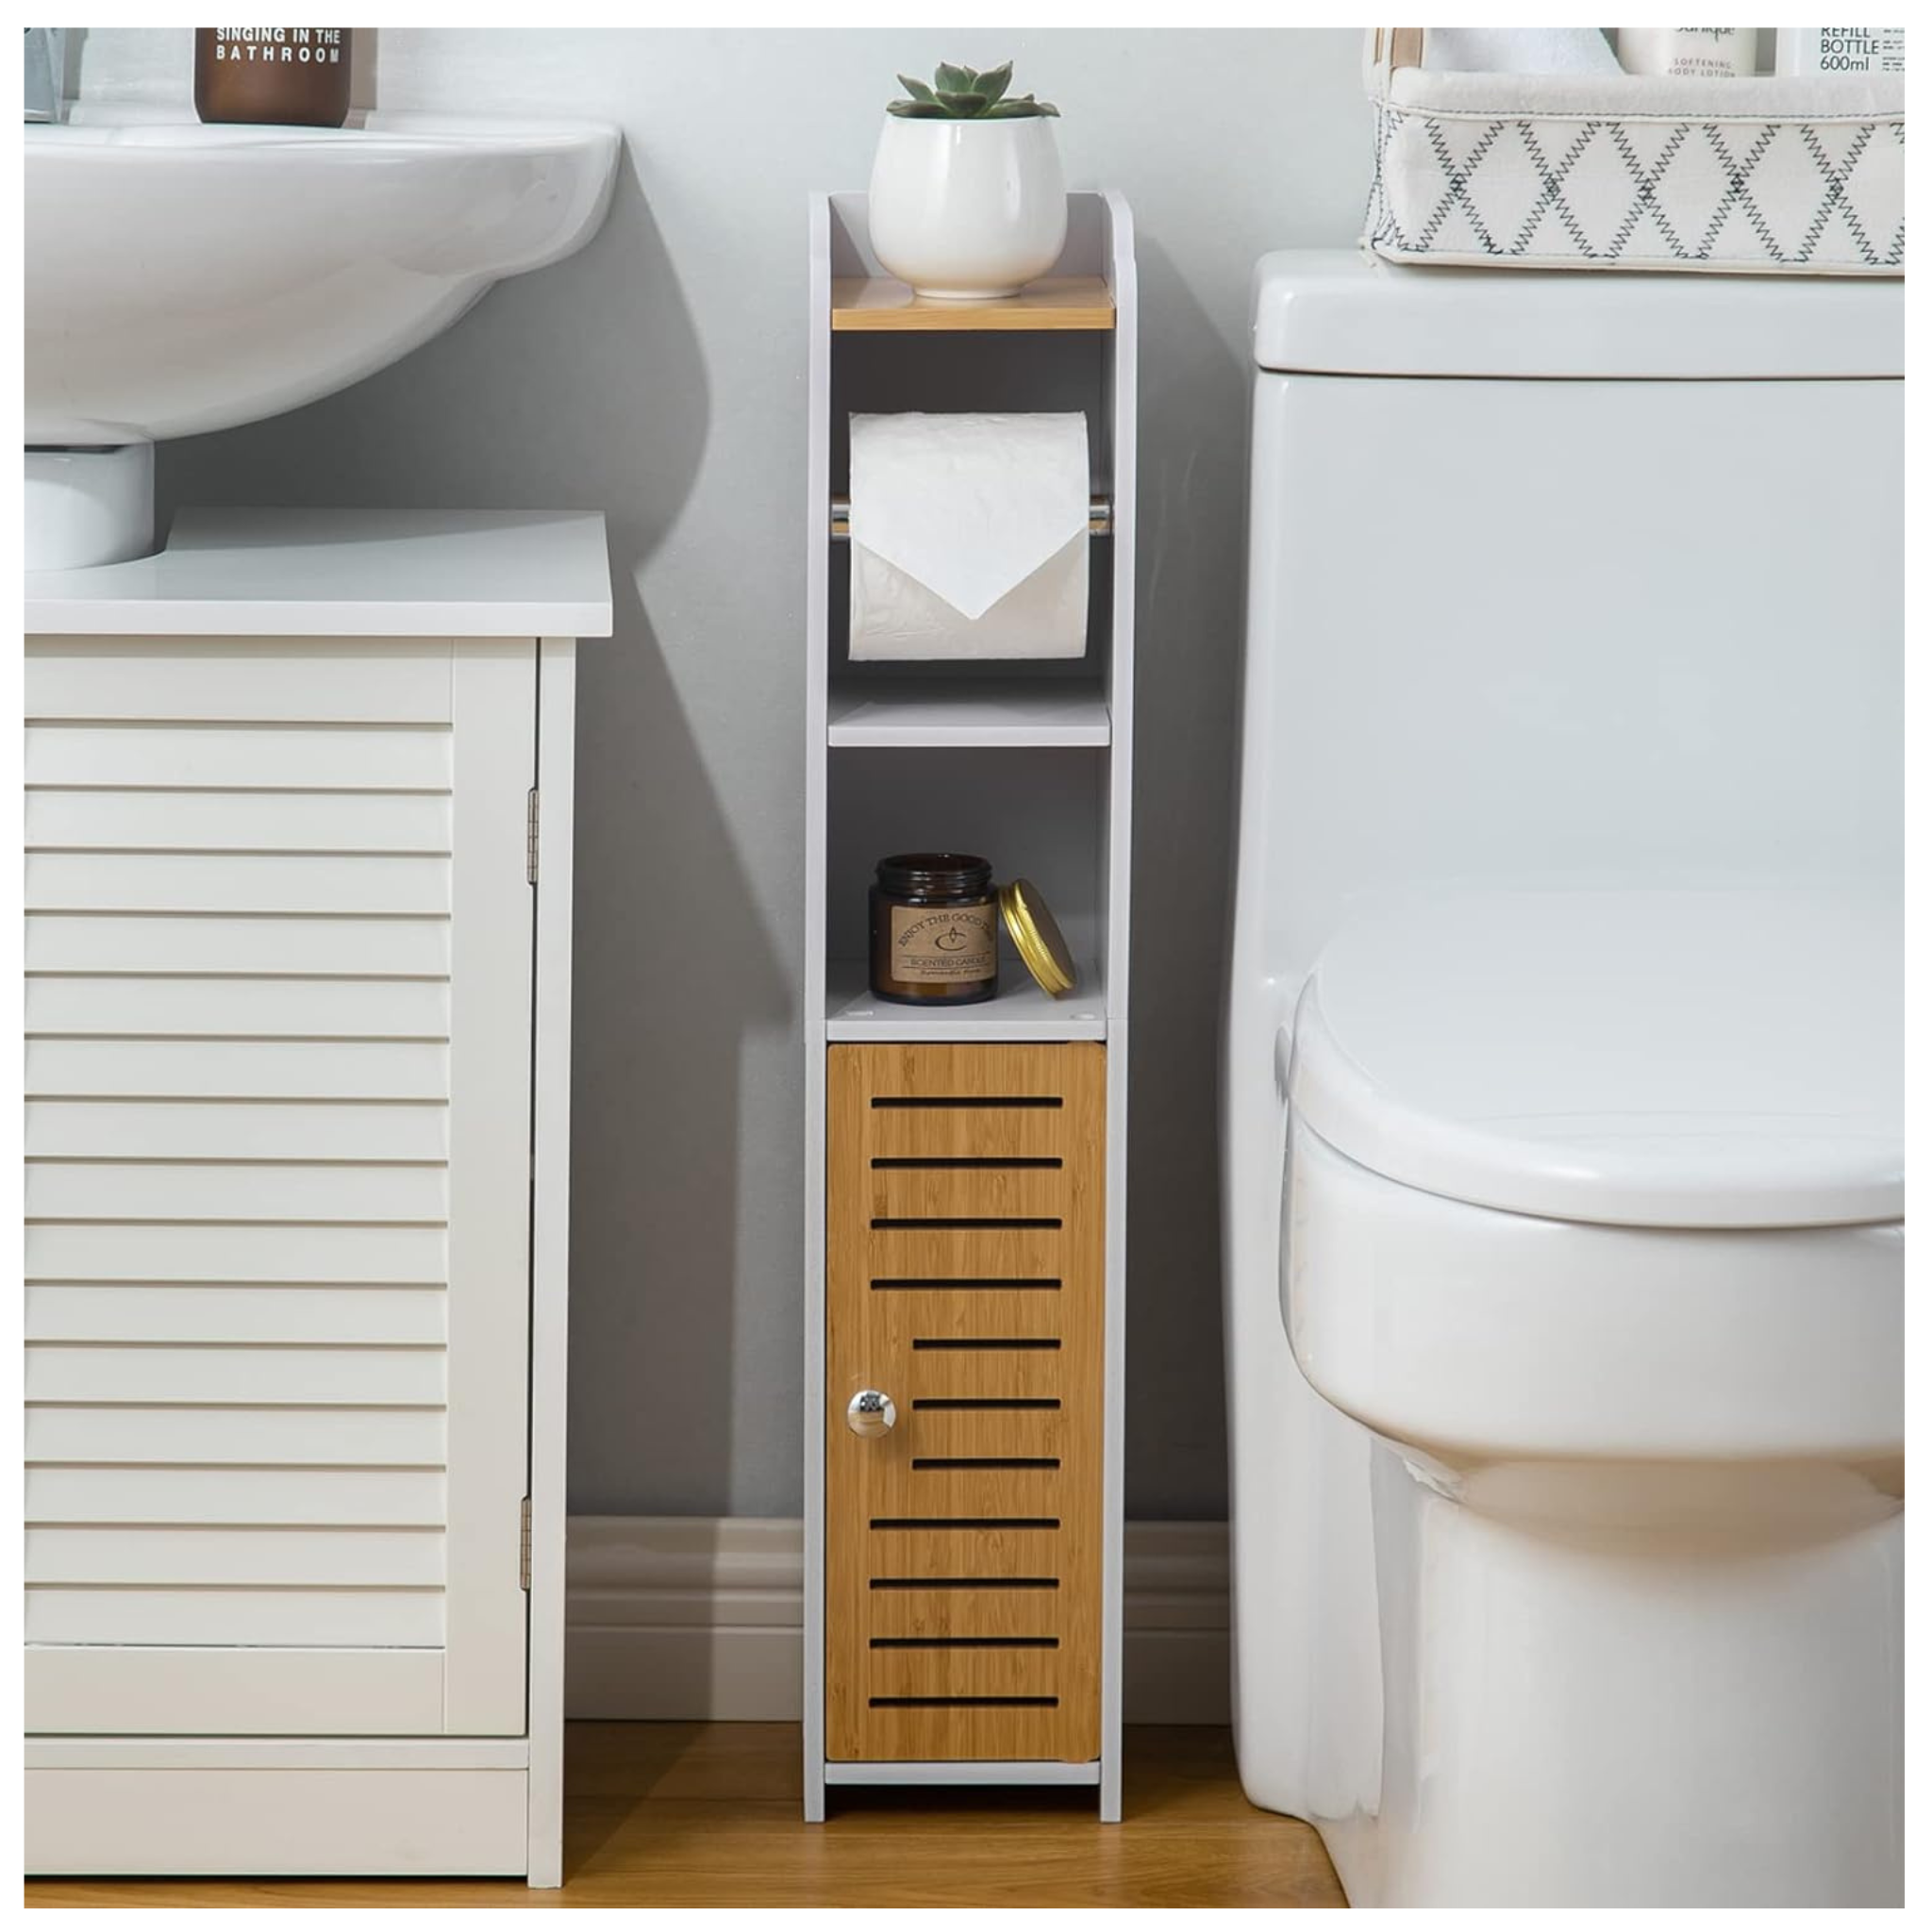 Aojezor Toilet Paper Holder Stand with Small Storage Cabinet